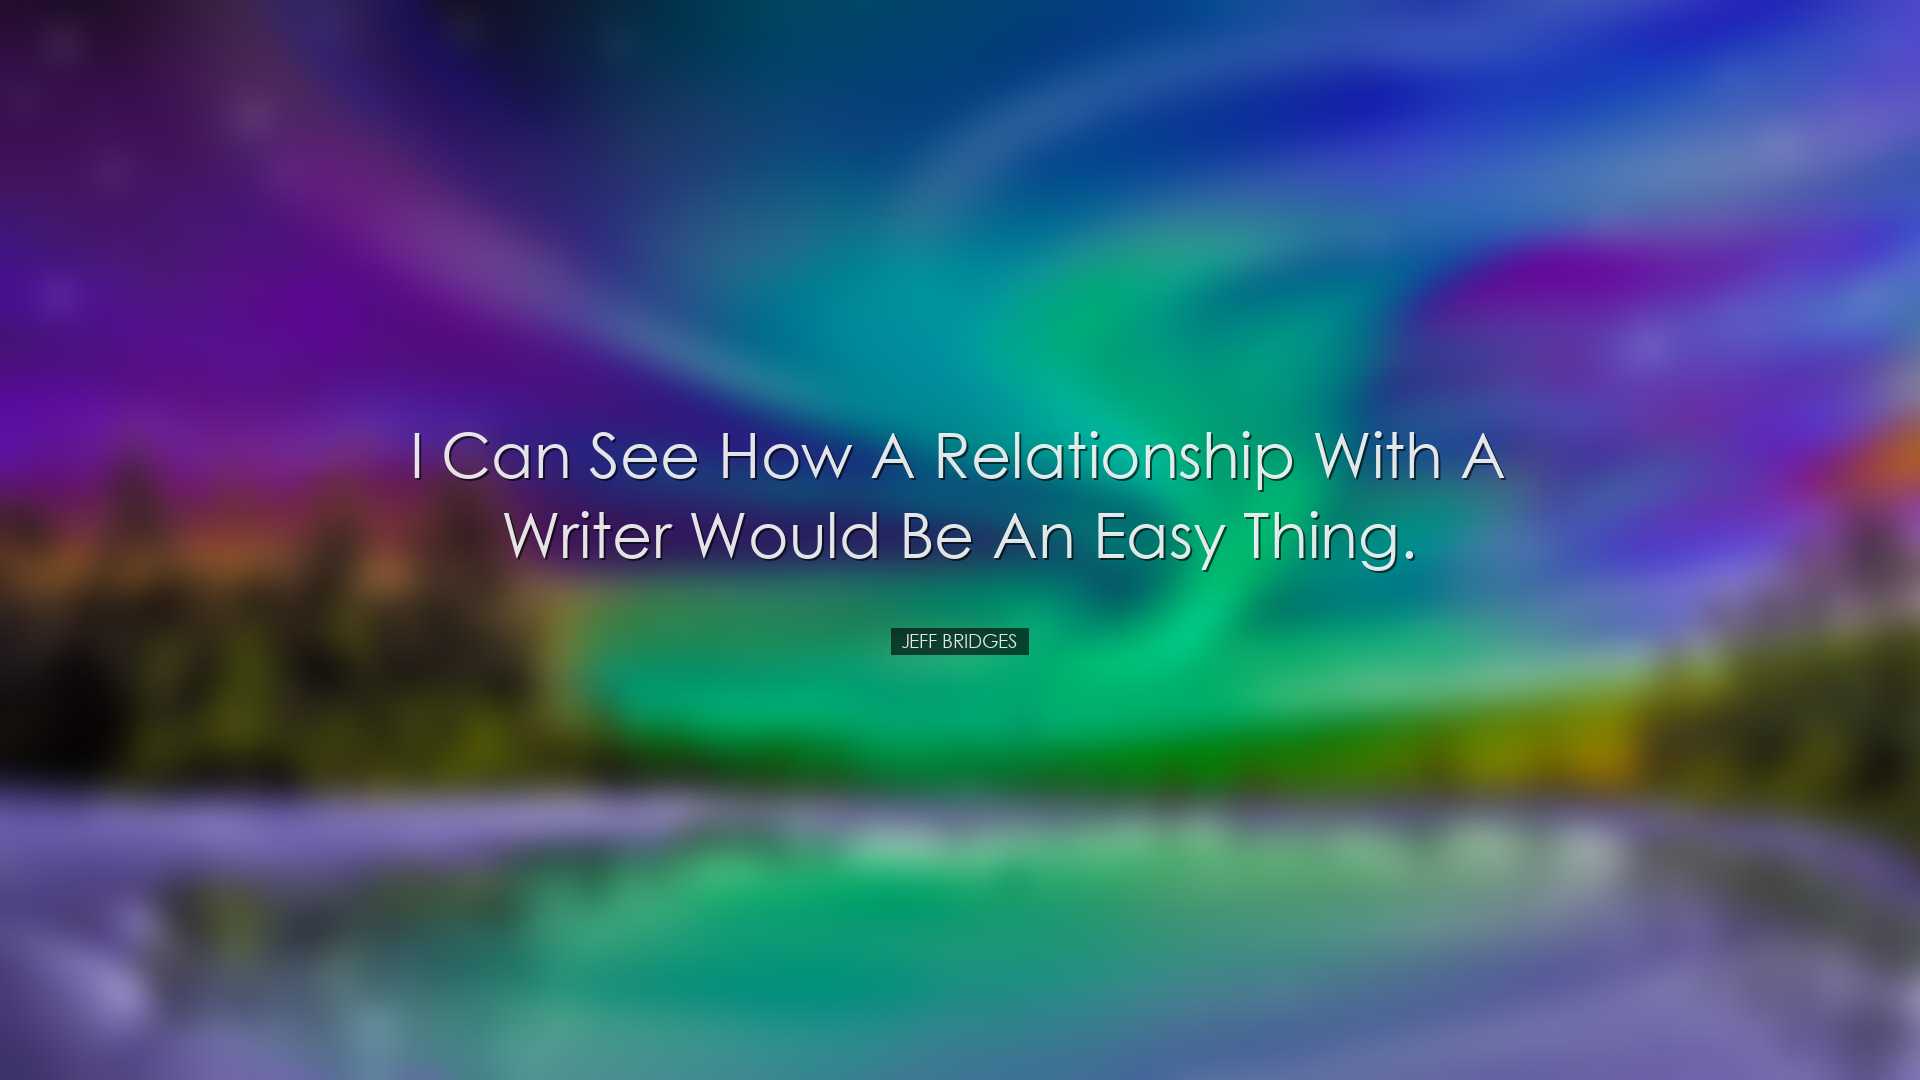 I can see how a relationship with a writer would be an easy thing.